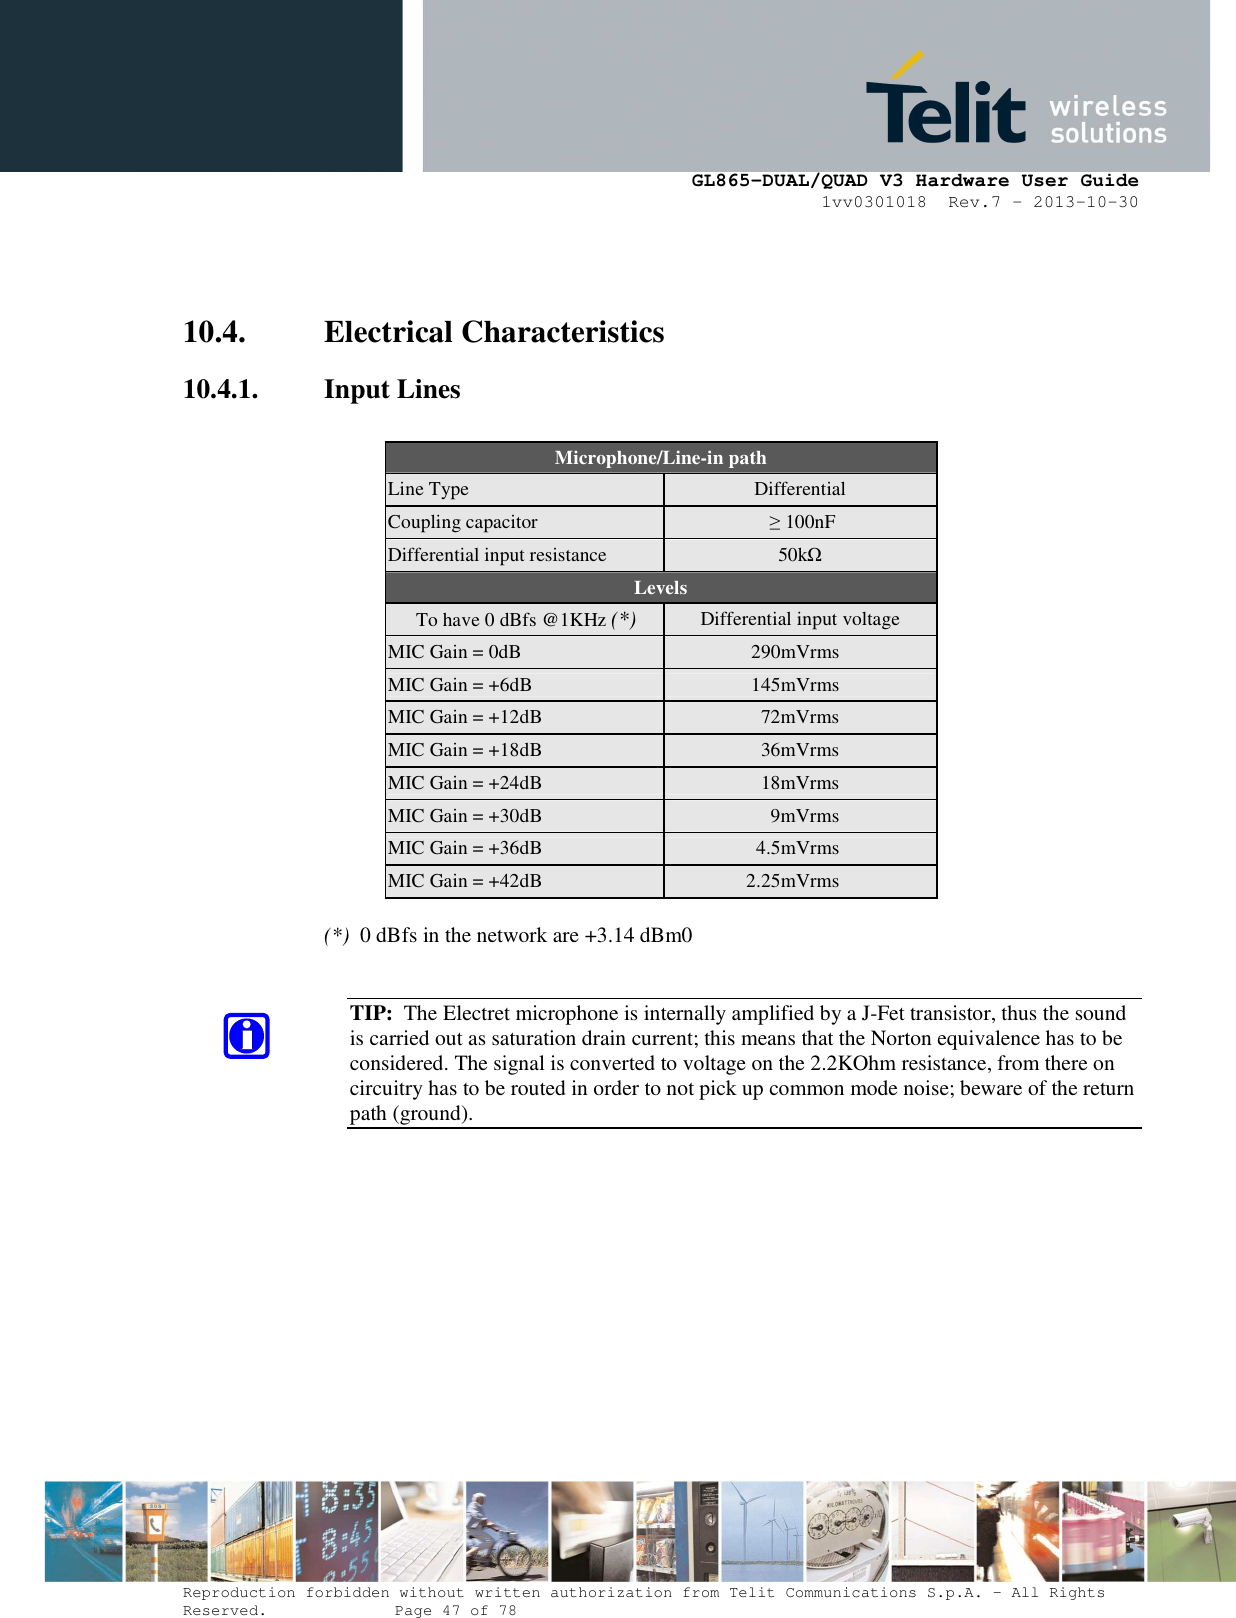      GL865-DUAL/QUAD V3 Hardware User Guide 1vv0301018  Rev.7 – 2013-10-30  Reproduction forbidden without written authorization from Telit Communications S.p.A. - All Rights Reserved.    Page 47 of 78 Mod. 0805 2011-07 Rev.2   10.4. Electrical Characteristics 10.4.1. Input Lines  Microphone/Line-in path Line Type  Differential Coupling capacitor  ≥ 100nF Differential input resistance  50kΩ Levels To have 0 dBfs @1KHz (*) Differential input voltage MIC Gain = 0dB    290mVrms MIC Gain = +6dB    145mVrms MIC Gain = +12dB    72mVrms MIC Gain = +18dB    36mVrms MIC Gain = +24dB    18mVrms MIC Gain = +30dB    9mVrms MIC Gain = +36dB    4.5mVrms MIC Gain = +42dB    2.25mVrms  (*)  0 dBfs in the network are +3.14 dBm0   TIP:  The Electret microphone is internally amplified by a J-Fet transistor, thus the sound is carried out as saturation drain current; this means that the Norton equivalence has to be considered. The signal is converted to voltage on the 2.2KOhm resistance, from there on circuitry has to be routed in order to not pick up common mode noise; beware of the return path (ground).                 